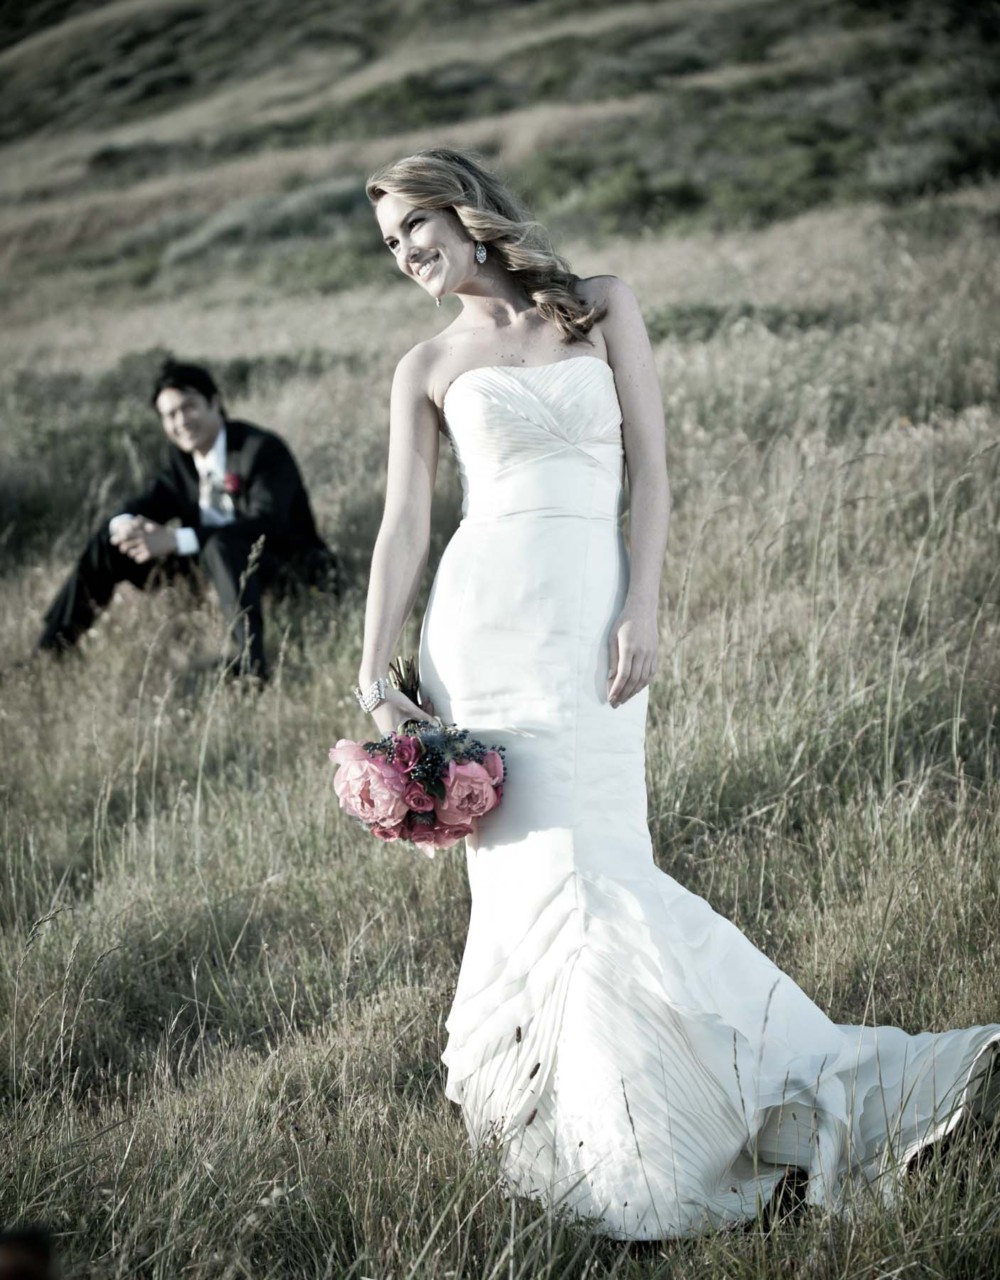 Looking for a affordable wedding photographer in Eagle River?